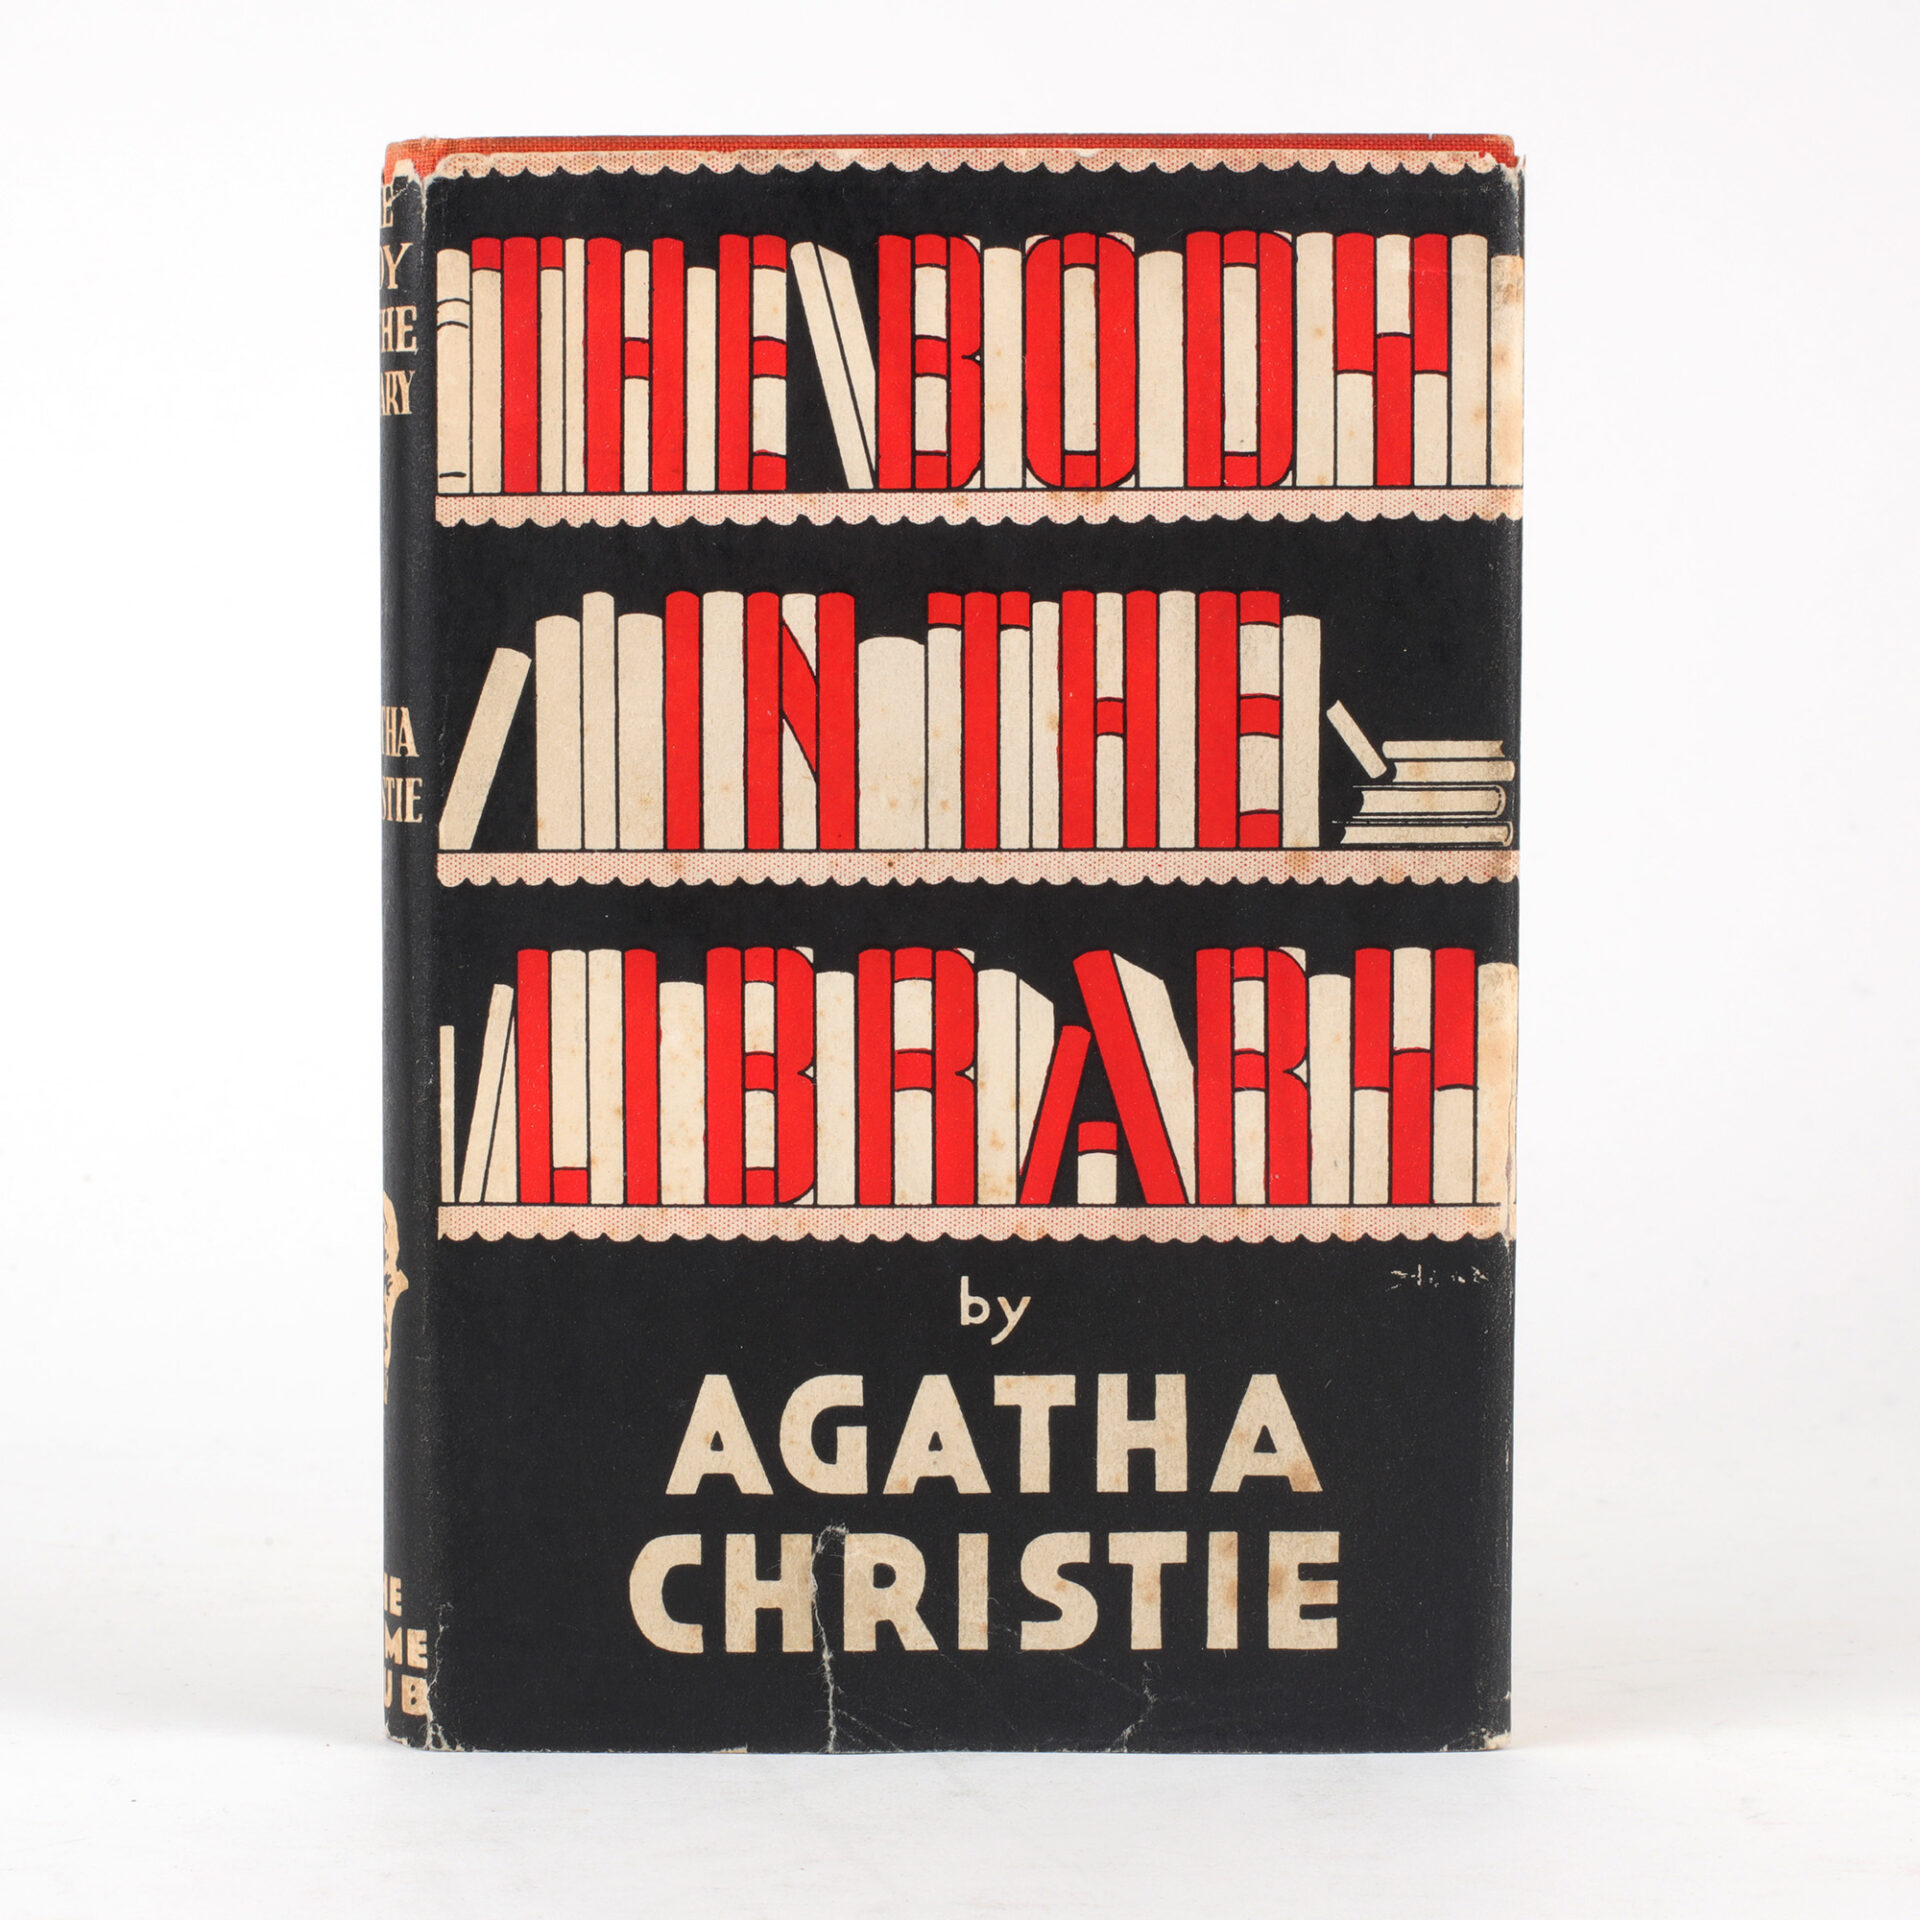 A picture of Agatha Christie's "The Body in the Library."